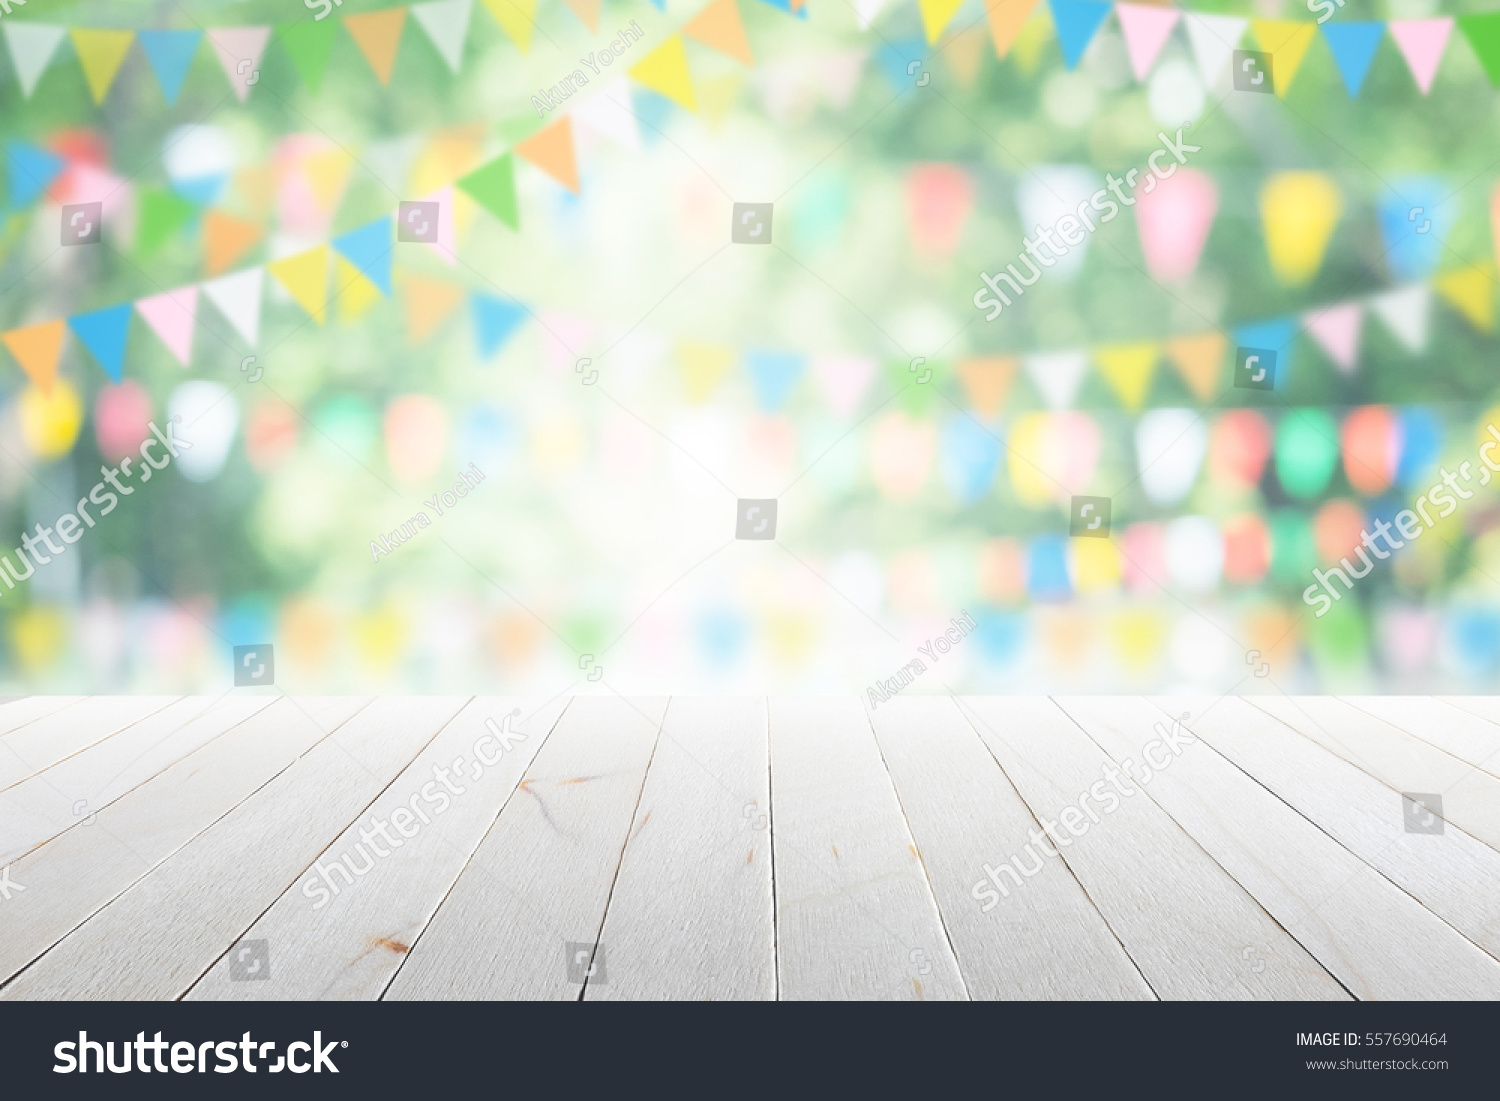 Empty wooden table with party in garden background blurred. #557690464